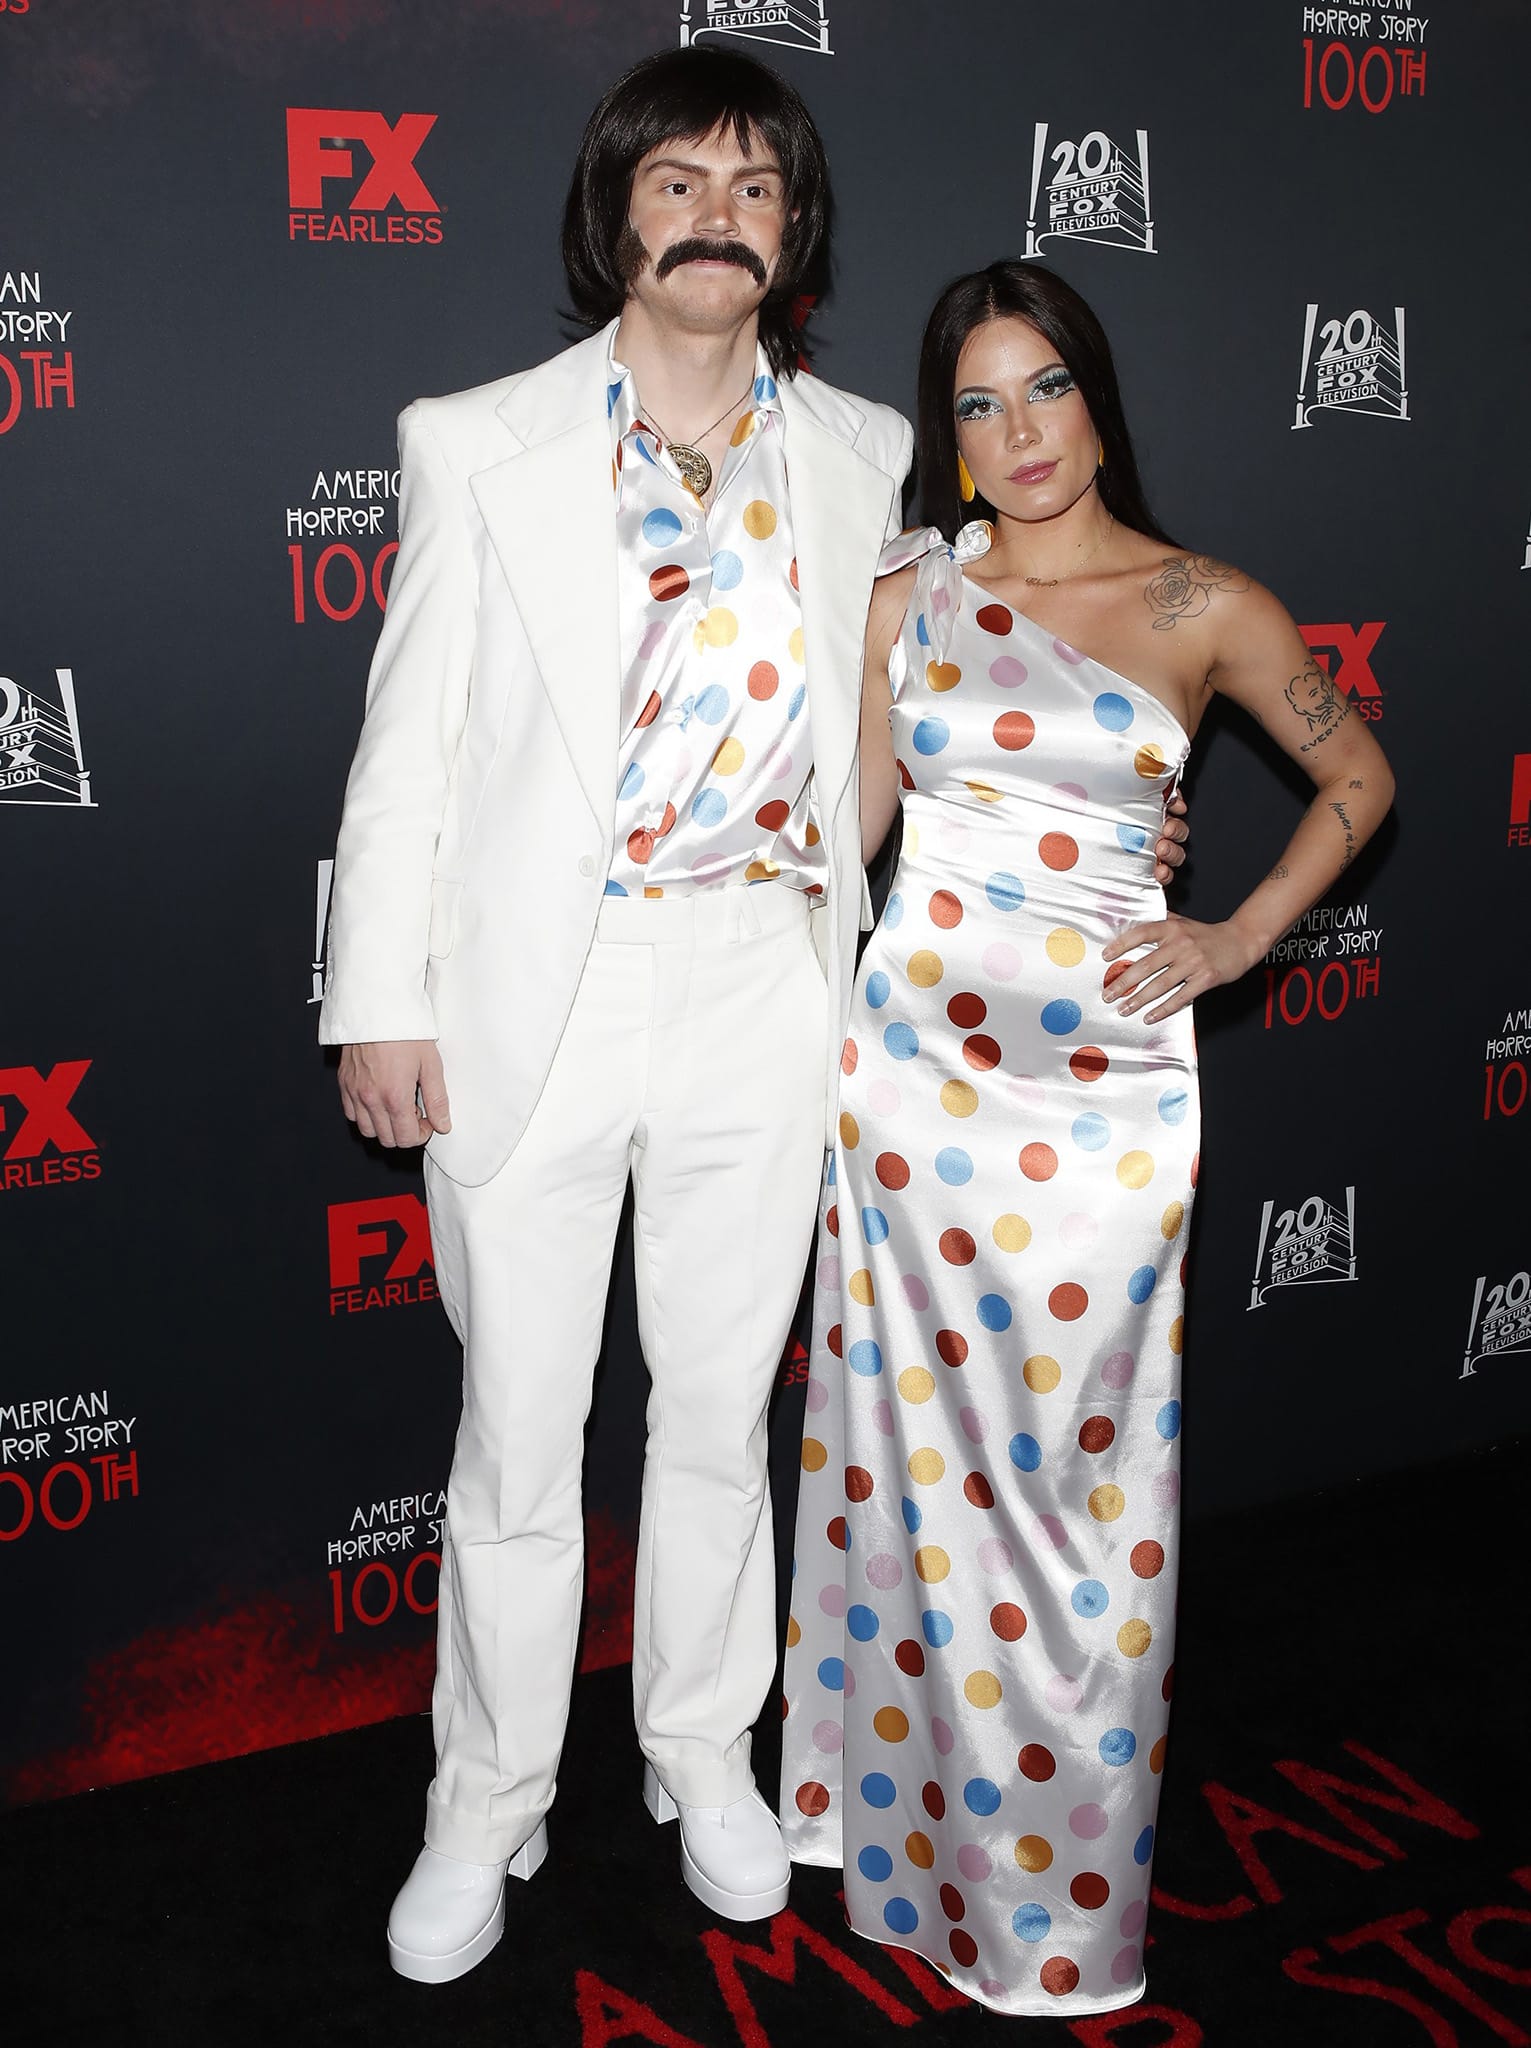 Evan Peters and Halsey dressed as Sonny and Cher at FX’s American Horror Story 100th Episode Celebration Halloween party on October 26, 2019